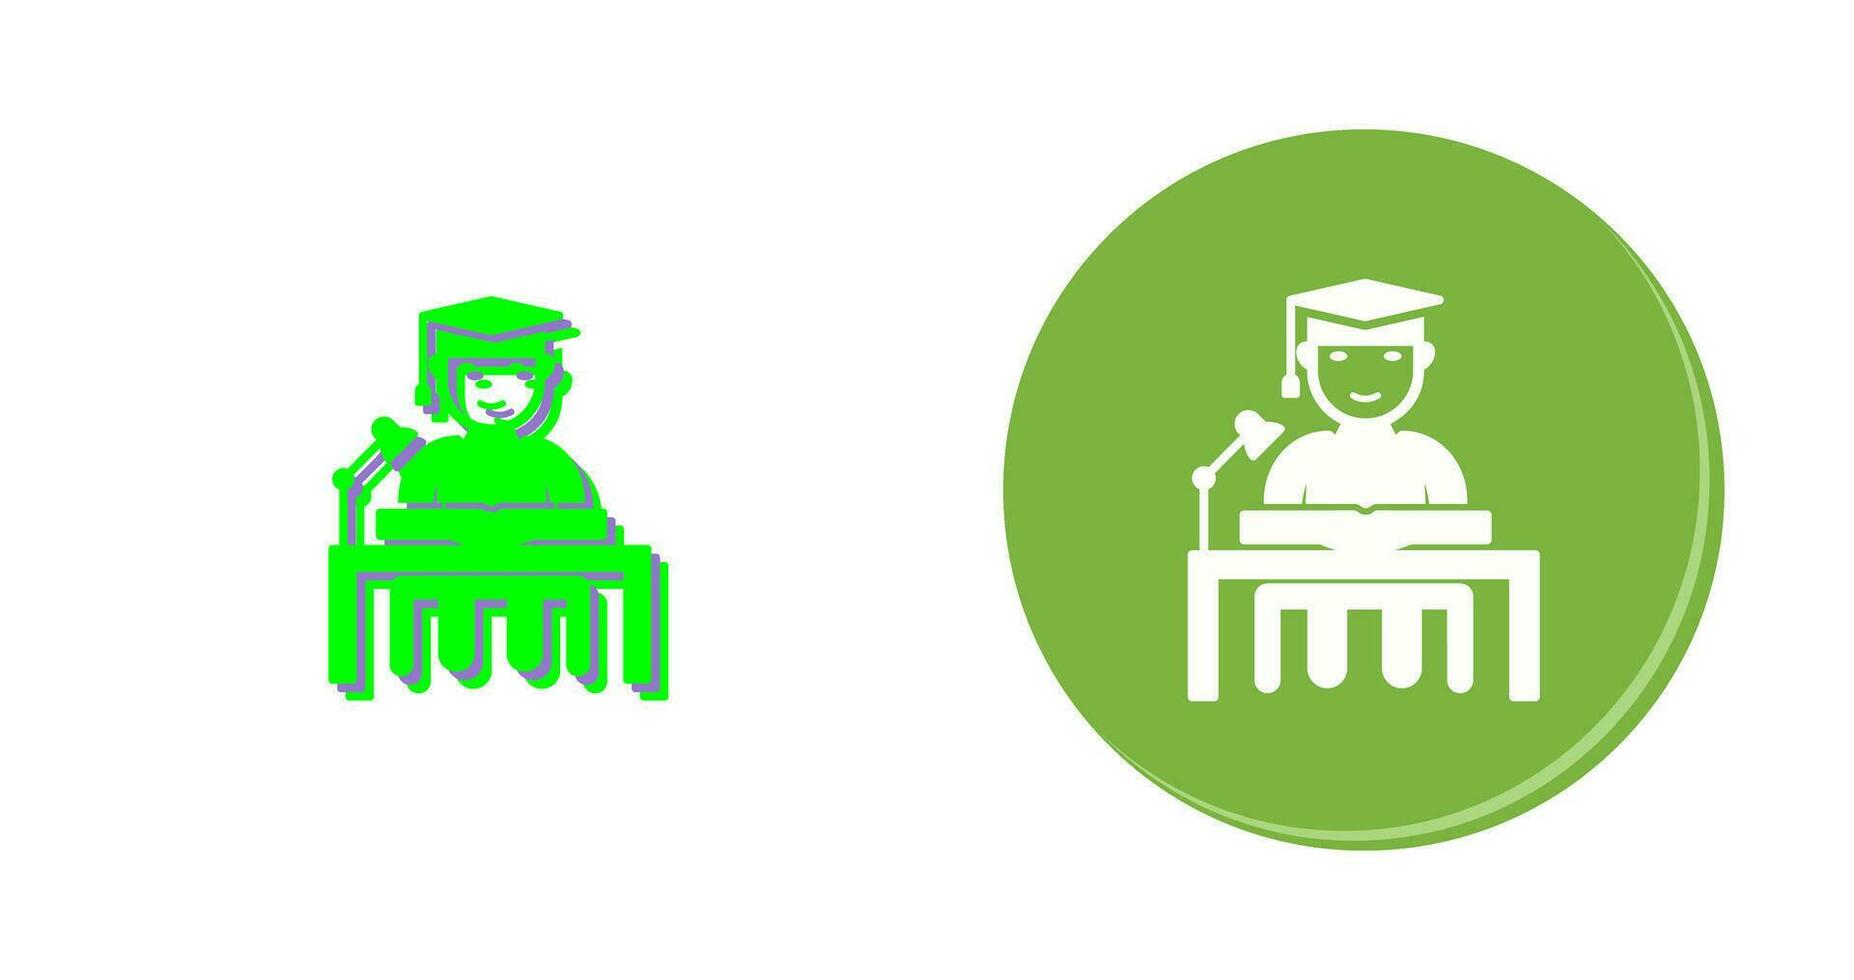 Unique Studying on Desk Vector Icon